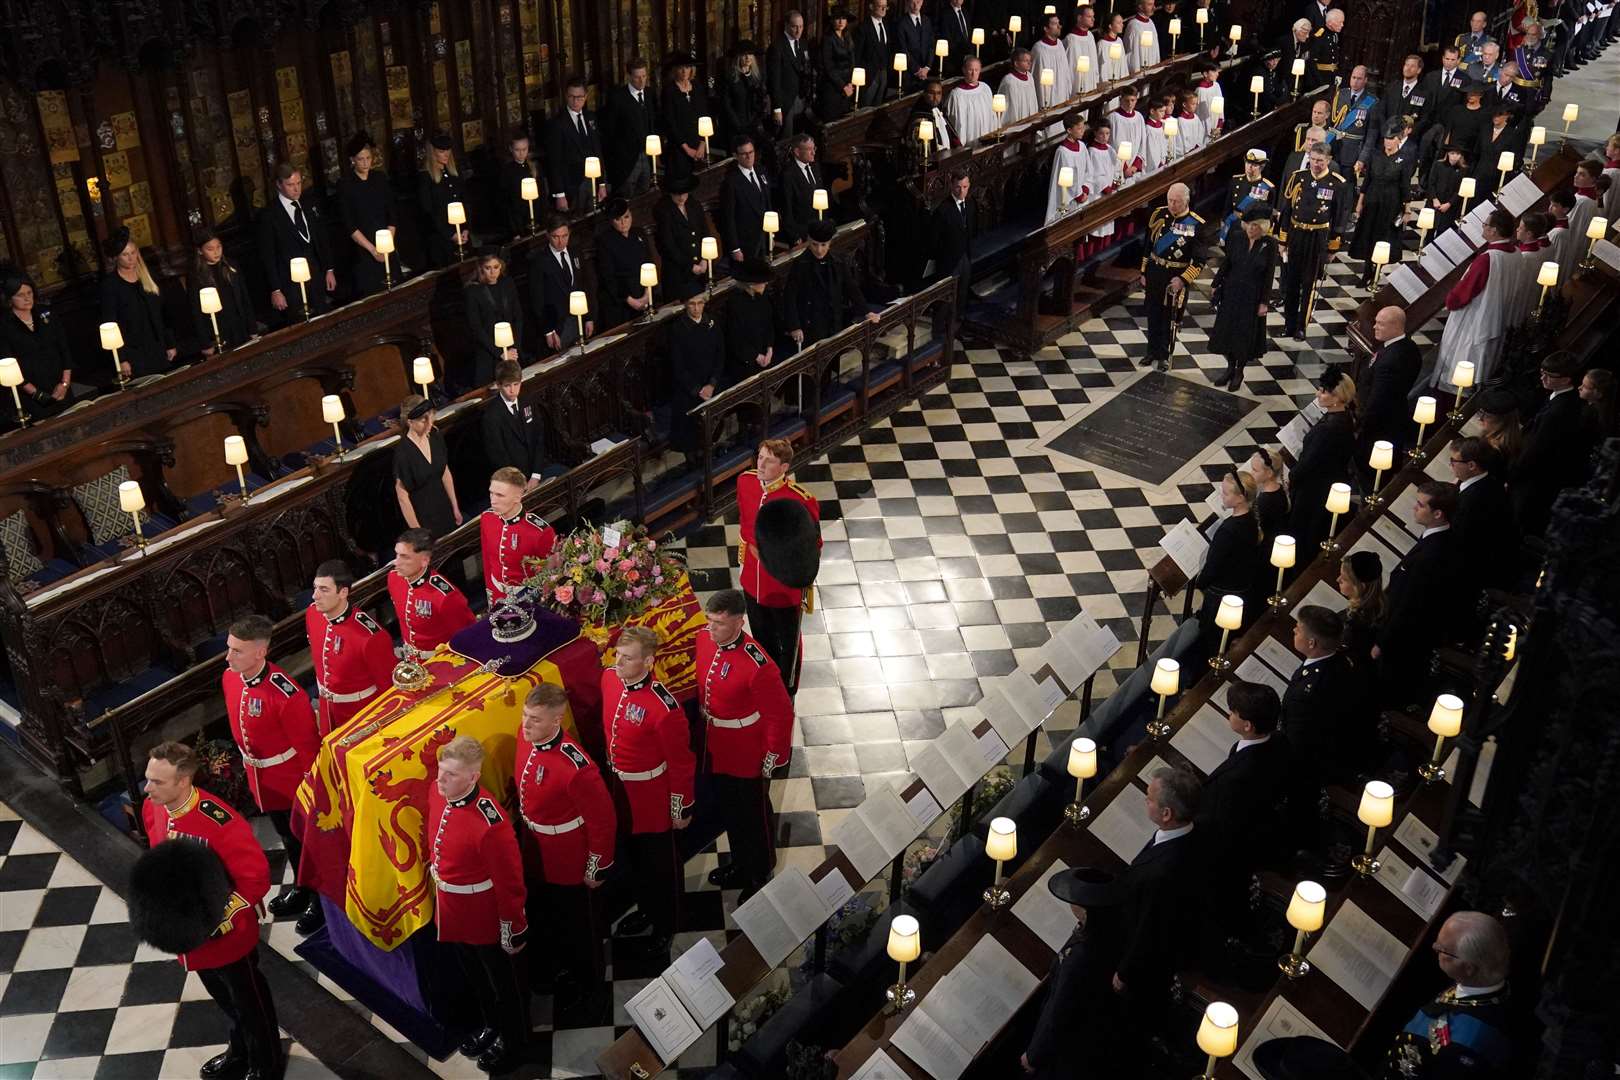 The Queen’s coffin is carried by the bearer party into the committal service at St George’s Chapel in September (Victoria Jones/PA)